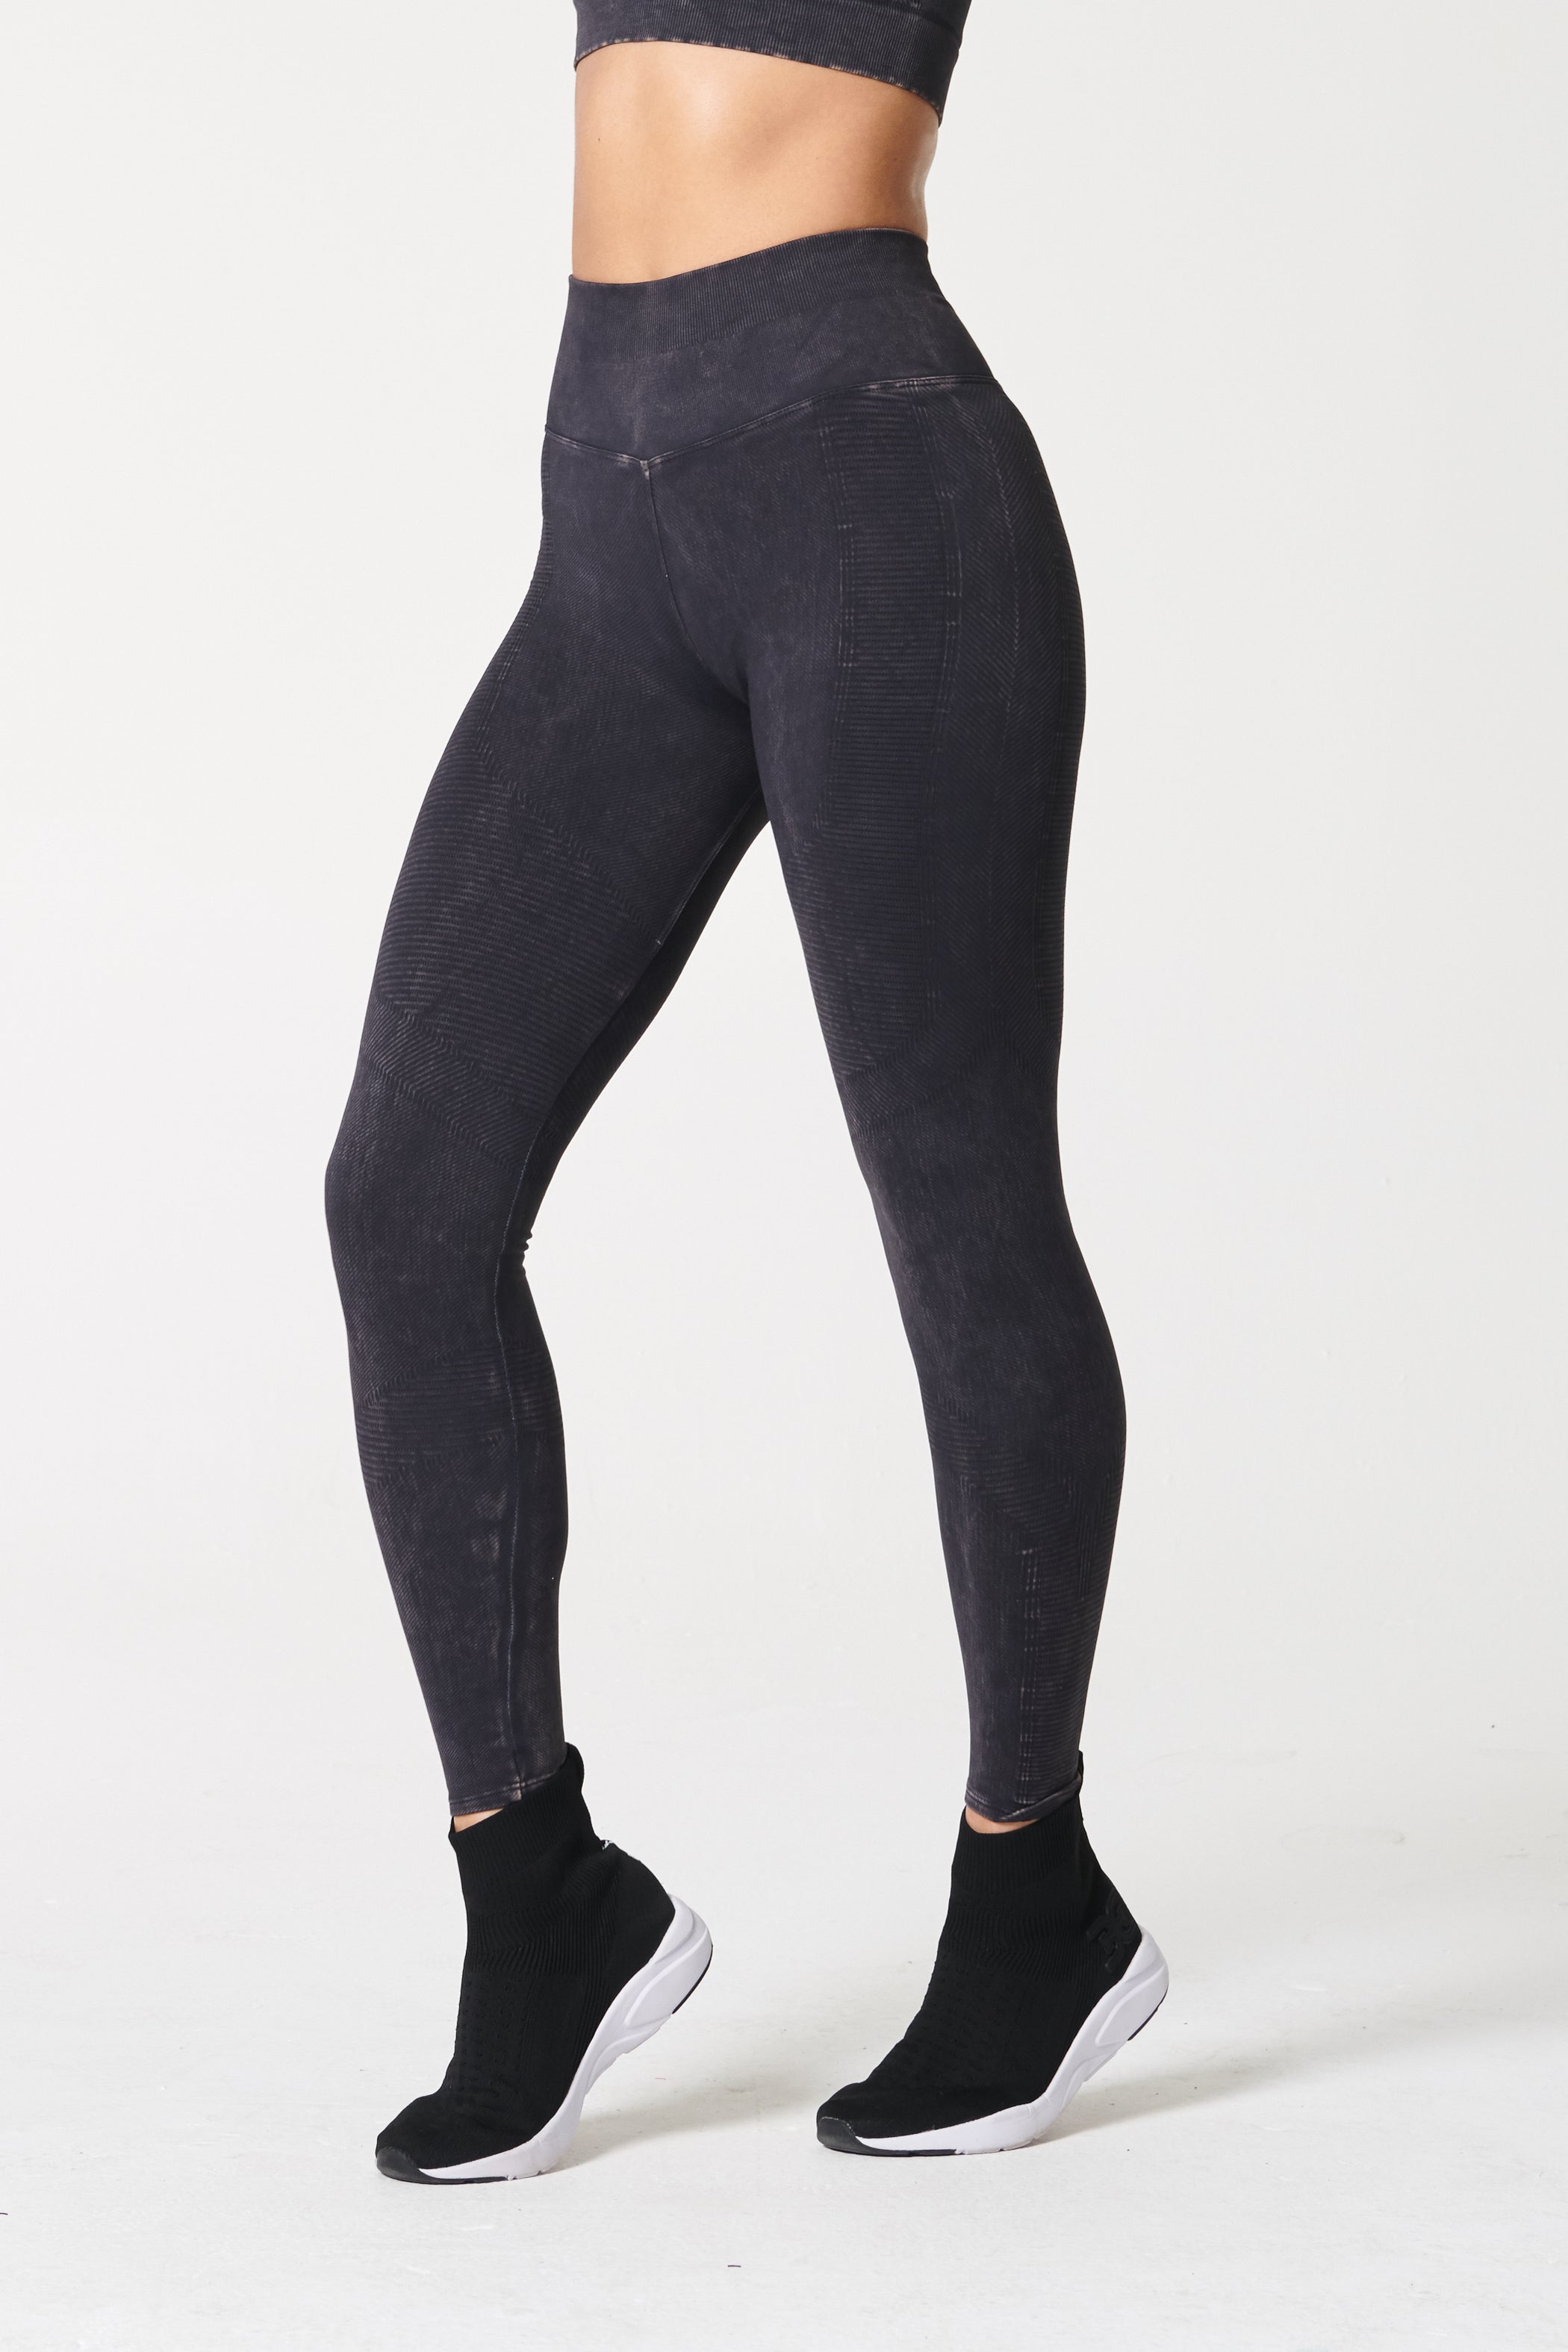 one-by-one-legging2